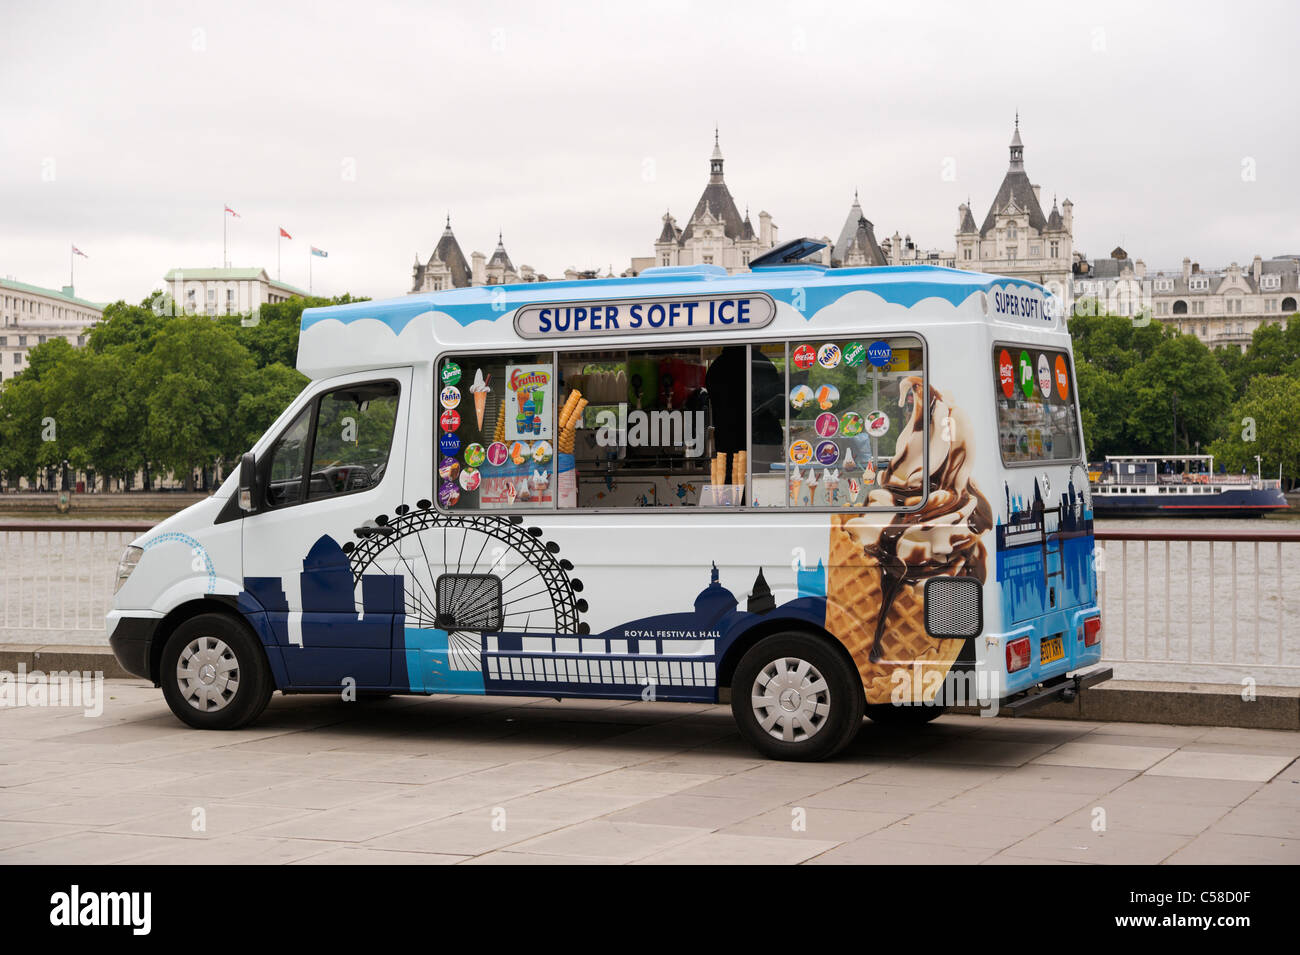 London, UK, Super soft ice, ice cream van, located on Queen's Walk, near Royal Festival Hall at Southbank. Stock Photo